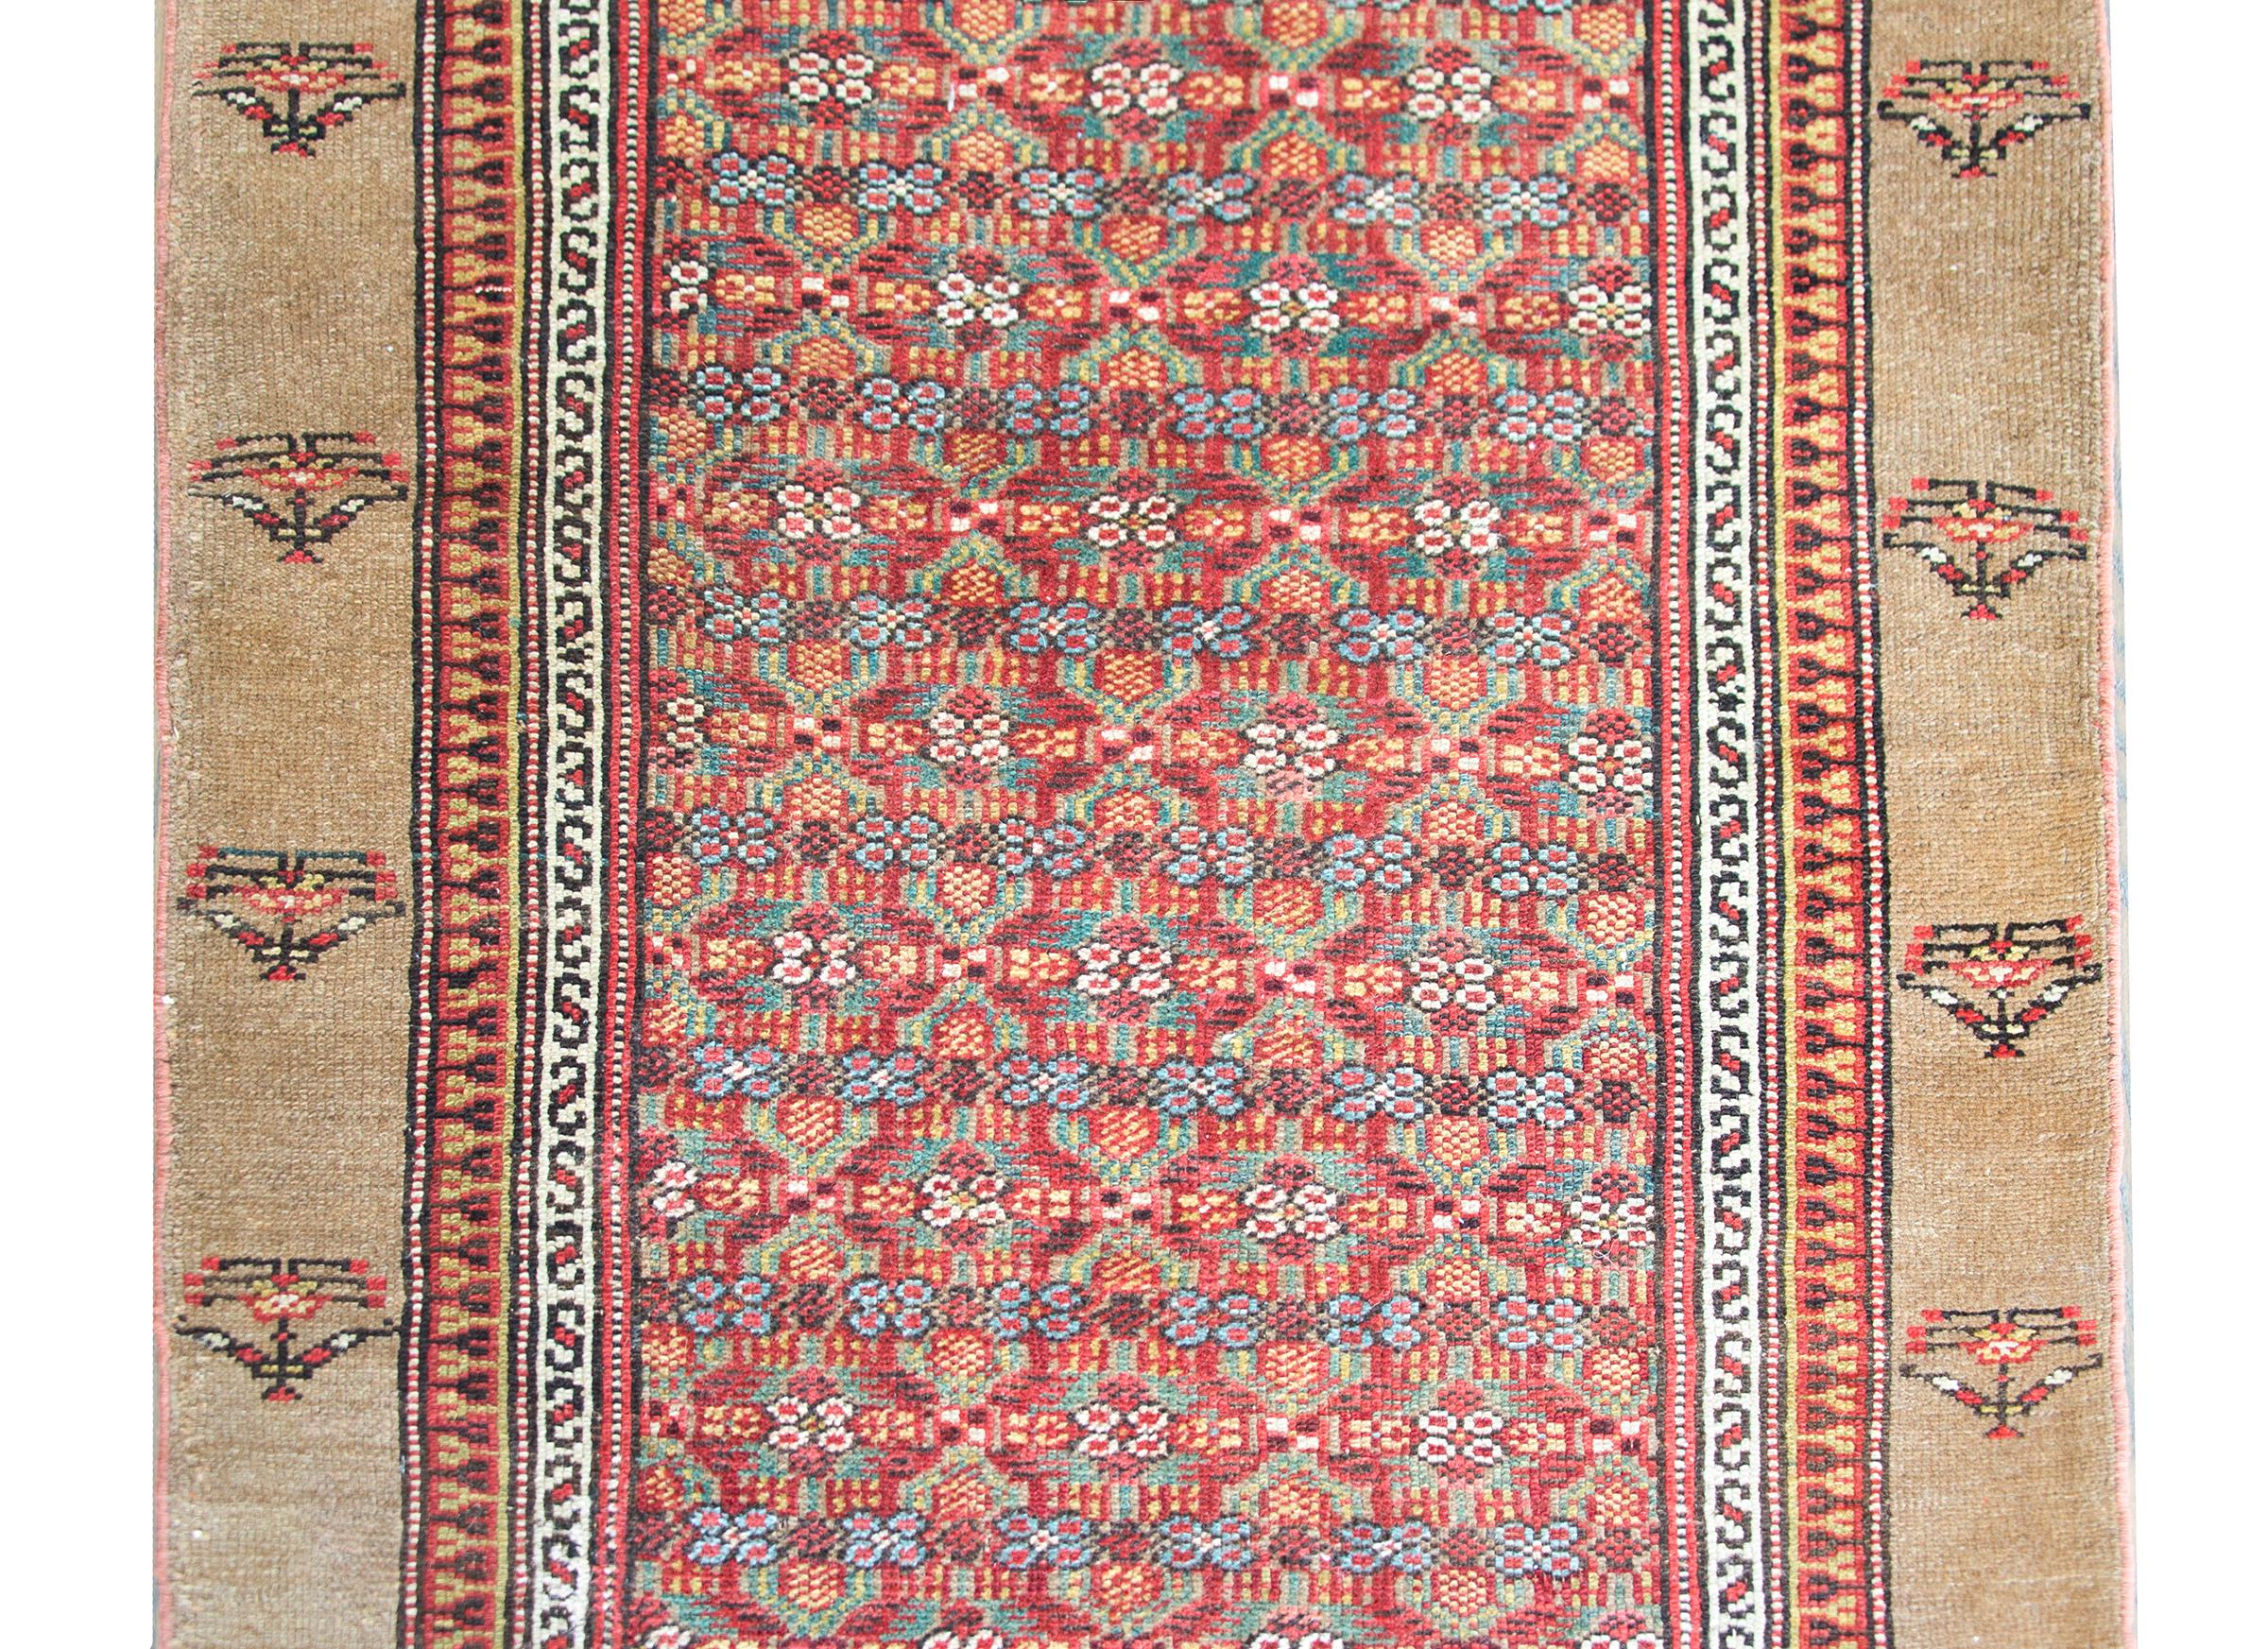 A stunning early 20th century Persian Serb runner with an all-over floral trellis pattern woven in crimson, green, light indigo, and gold, and surrounded by a border composed of thin geometric pattered inner stripes and a wide natural camel hair